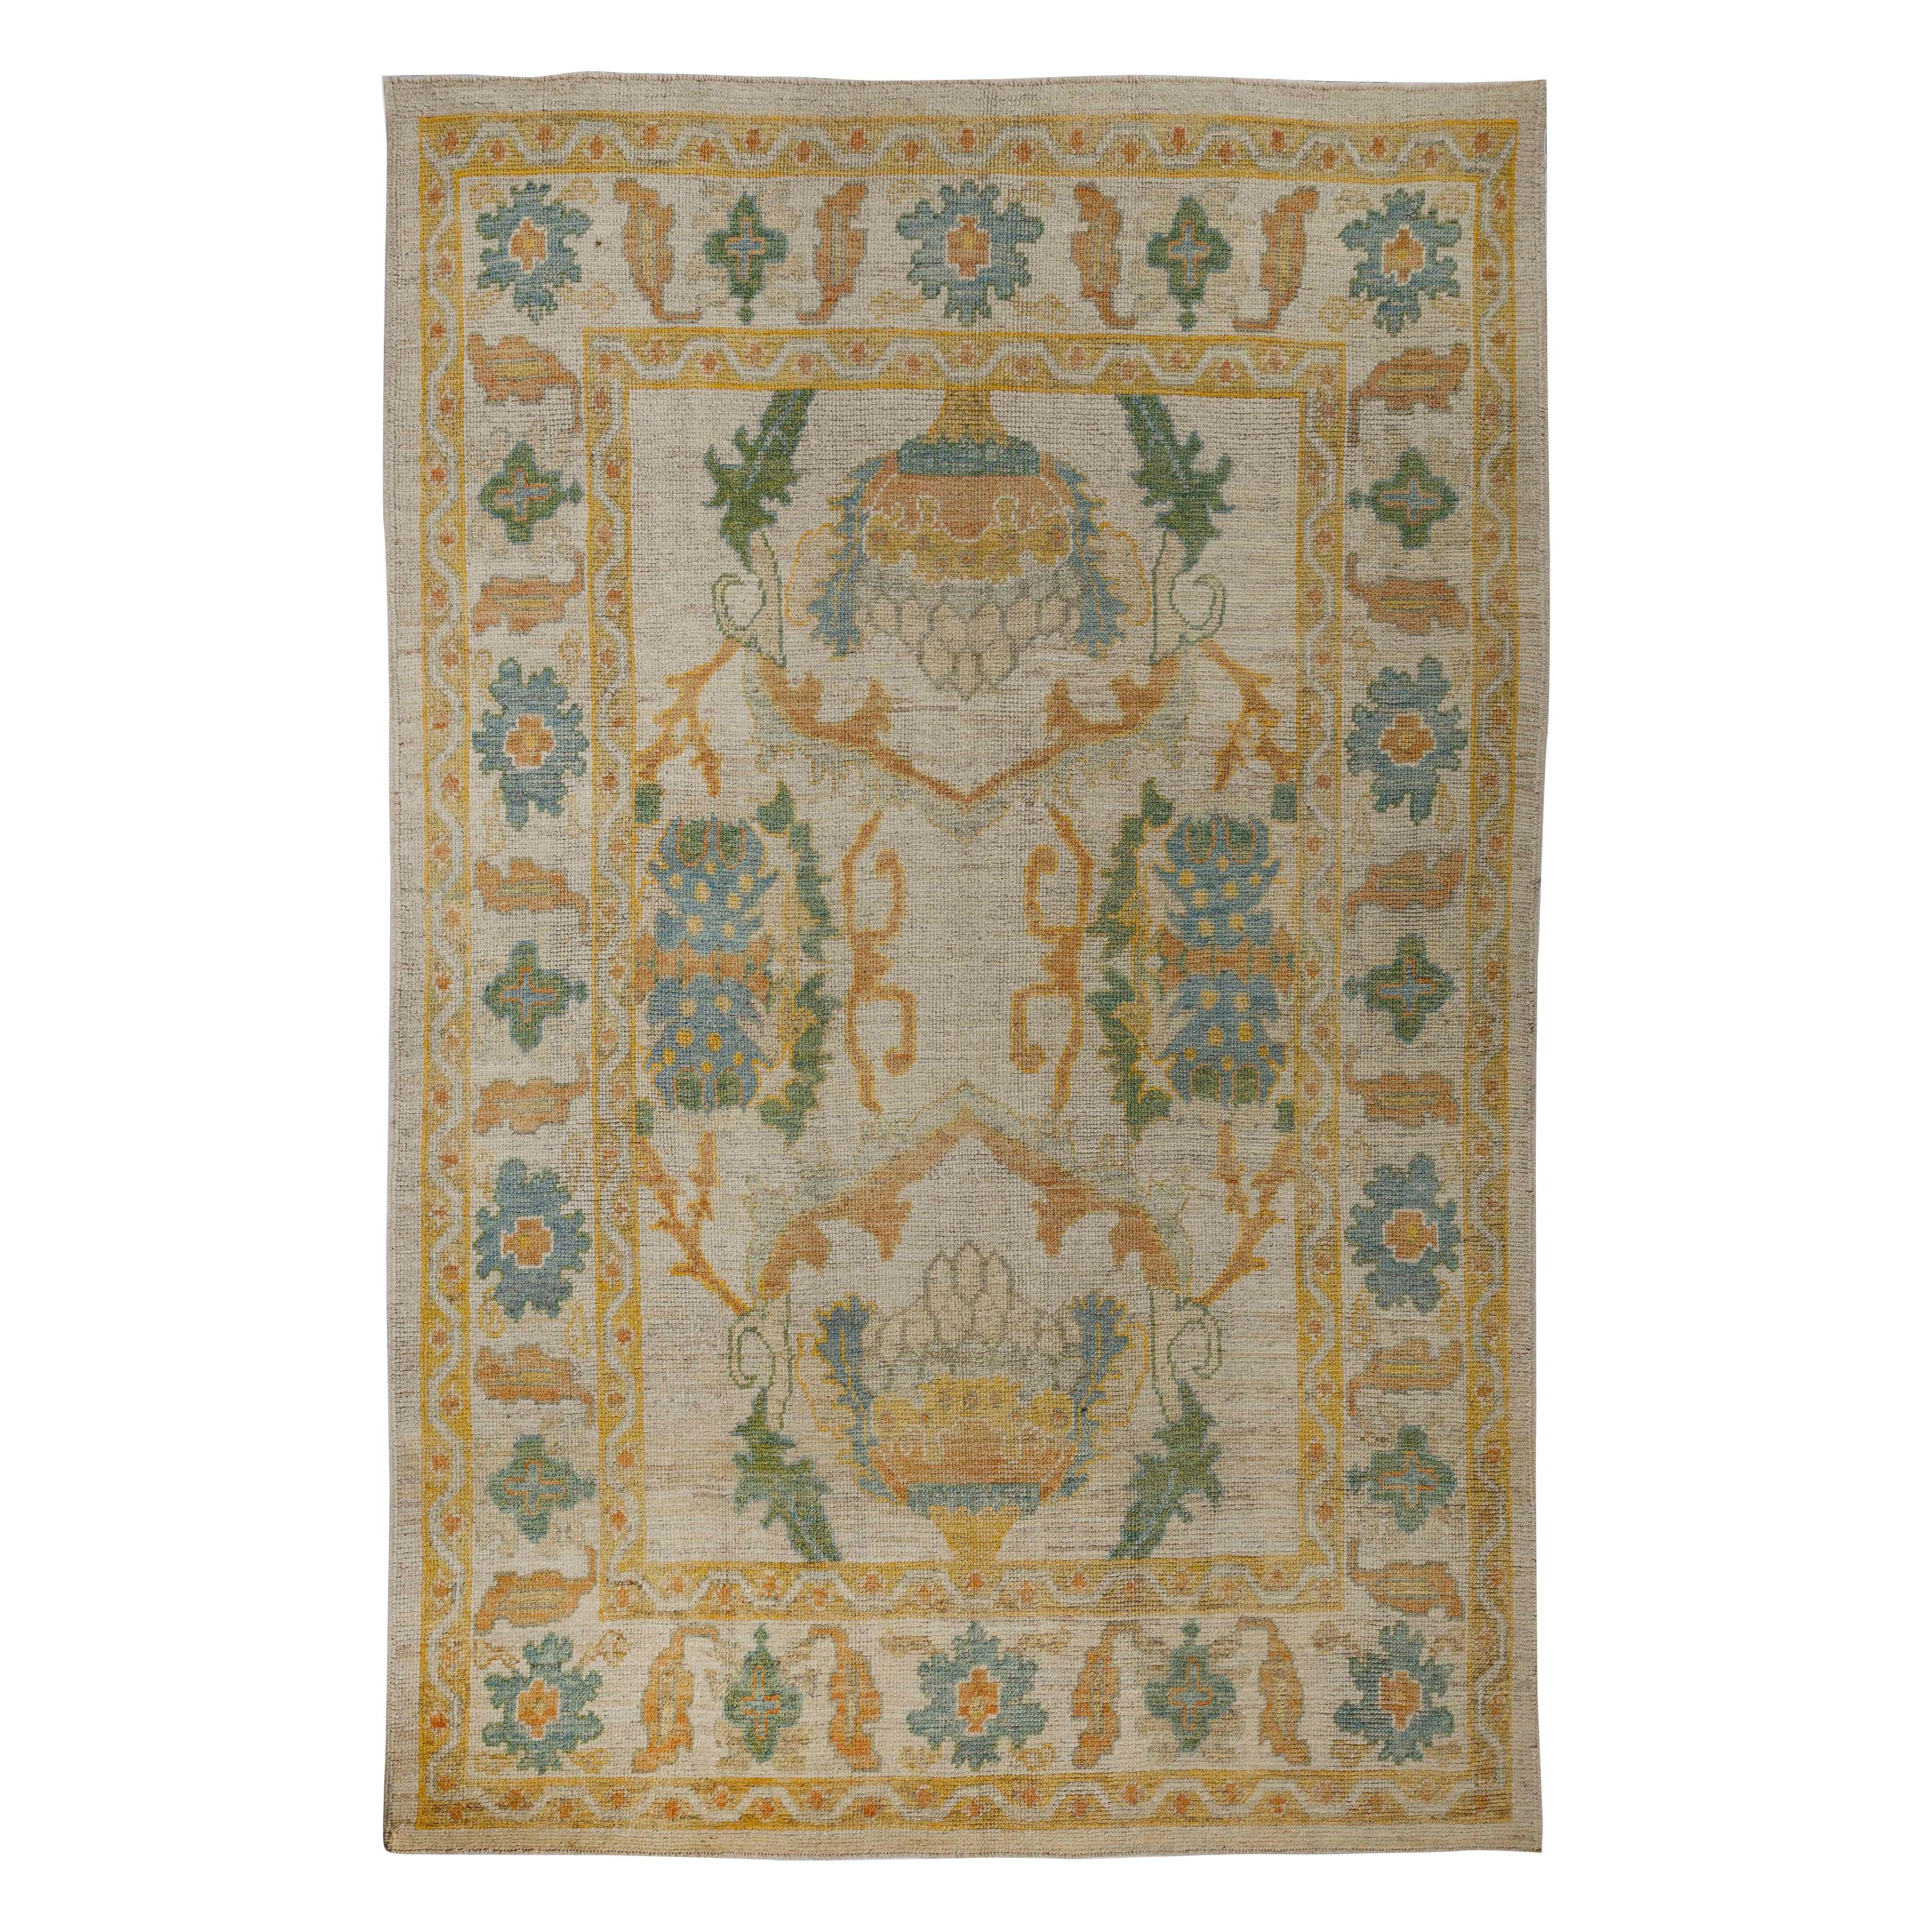 Contemporary Turkish Oushak Rug with Green and Blue Floral Design